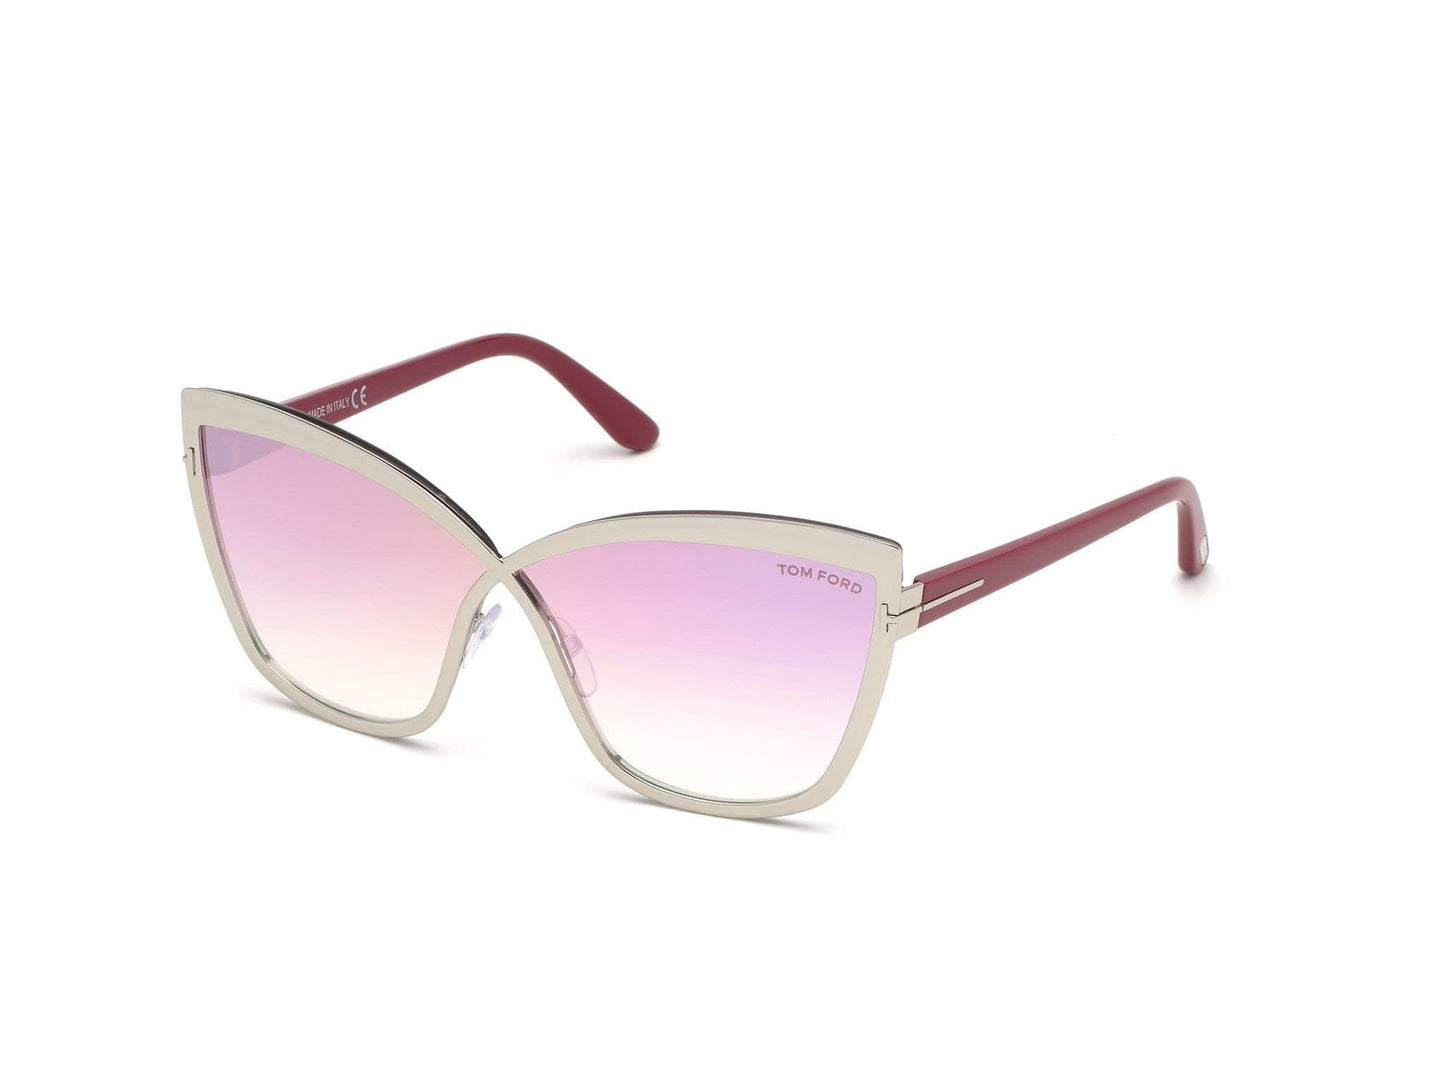 Tom Ford FT0715 Sandrine-02 Butterfly Sunglasses 16Z-16Z - Shiny Palladium, Shiny Red Temples/ Gradient Pink-To-Pearl Lenses